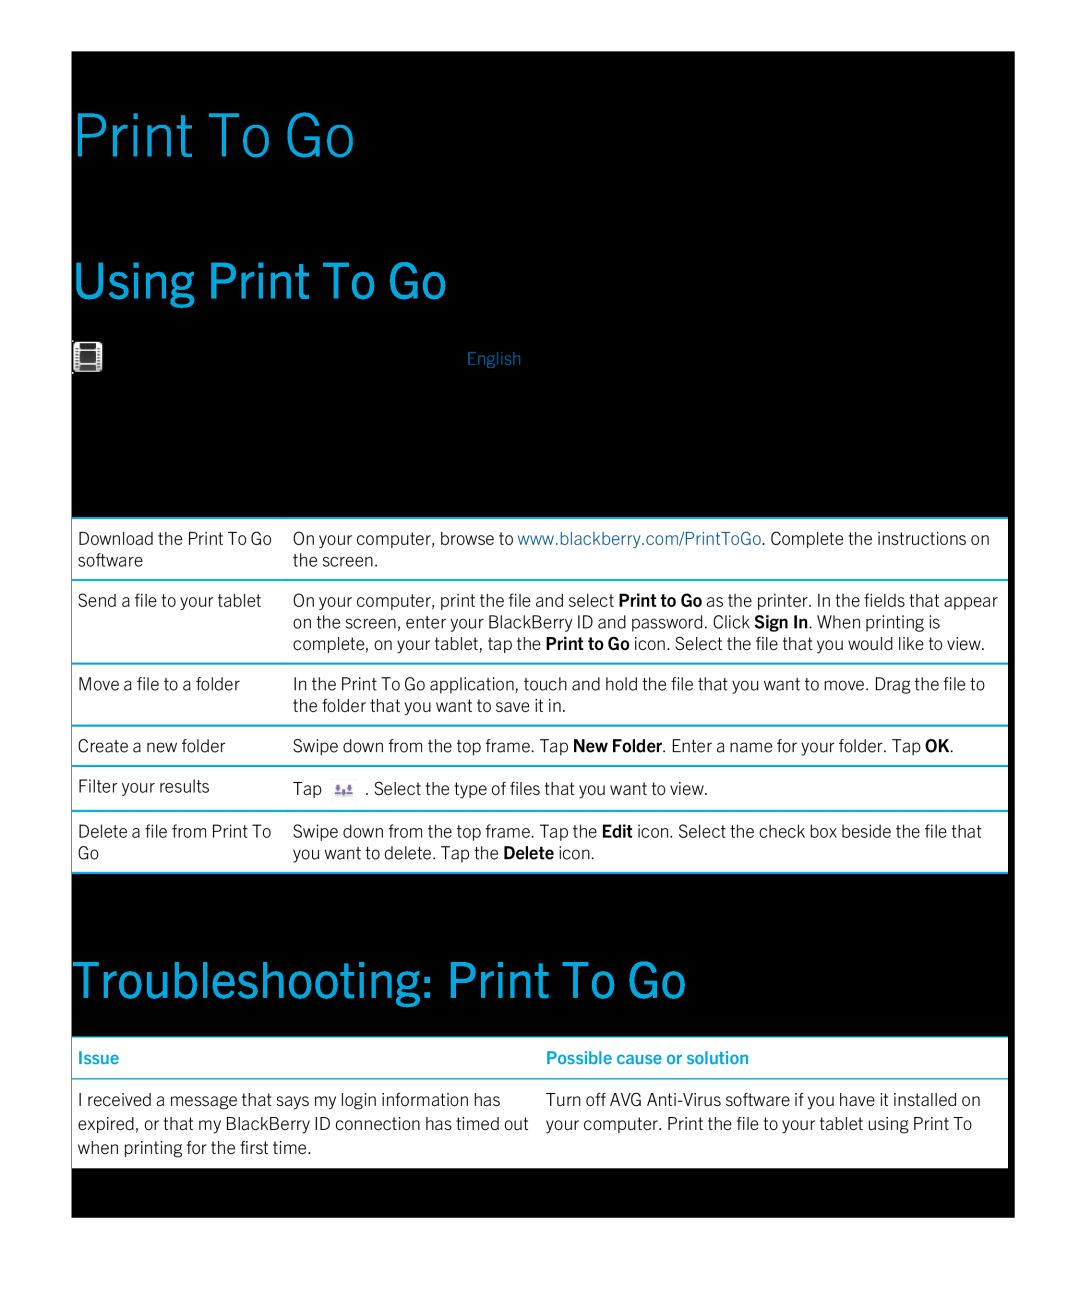 Blackberry 2.0.1 manual Using Print To Go, Troubleshooting Print To Go, Issue, Possible cause or solution 